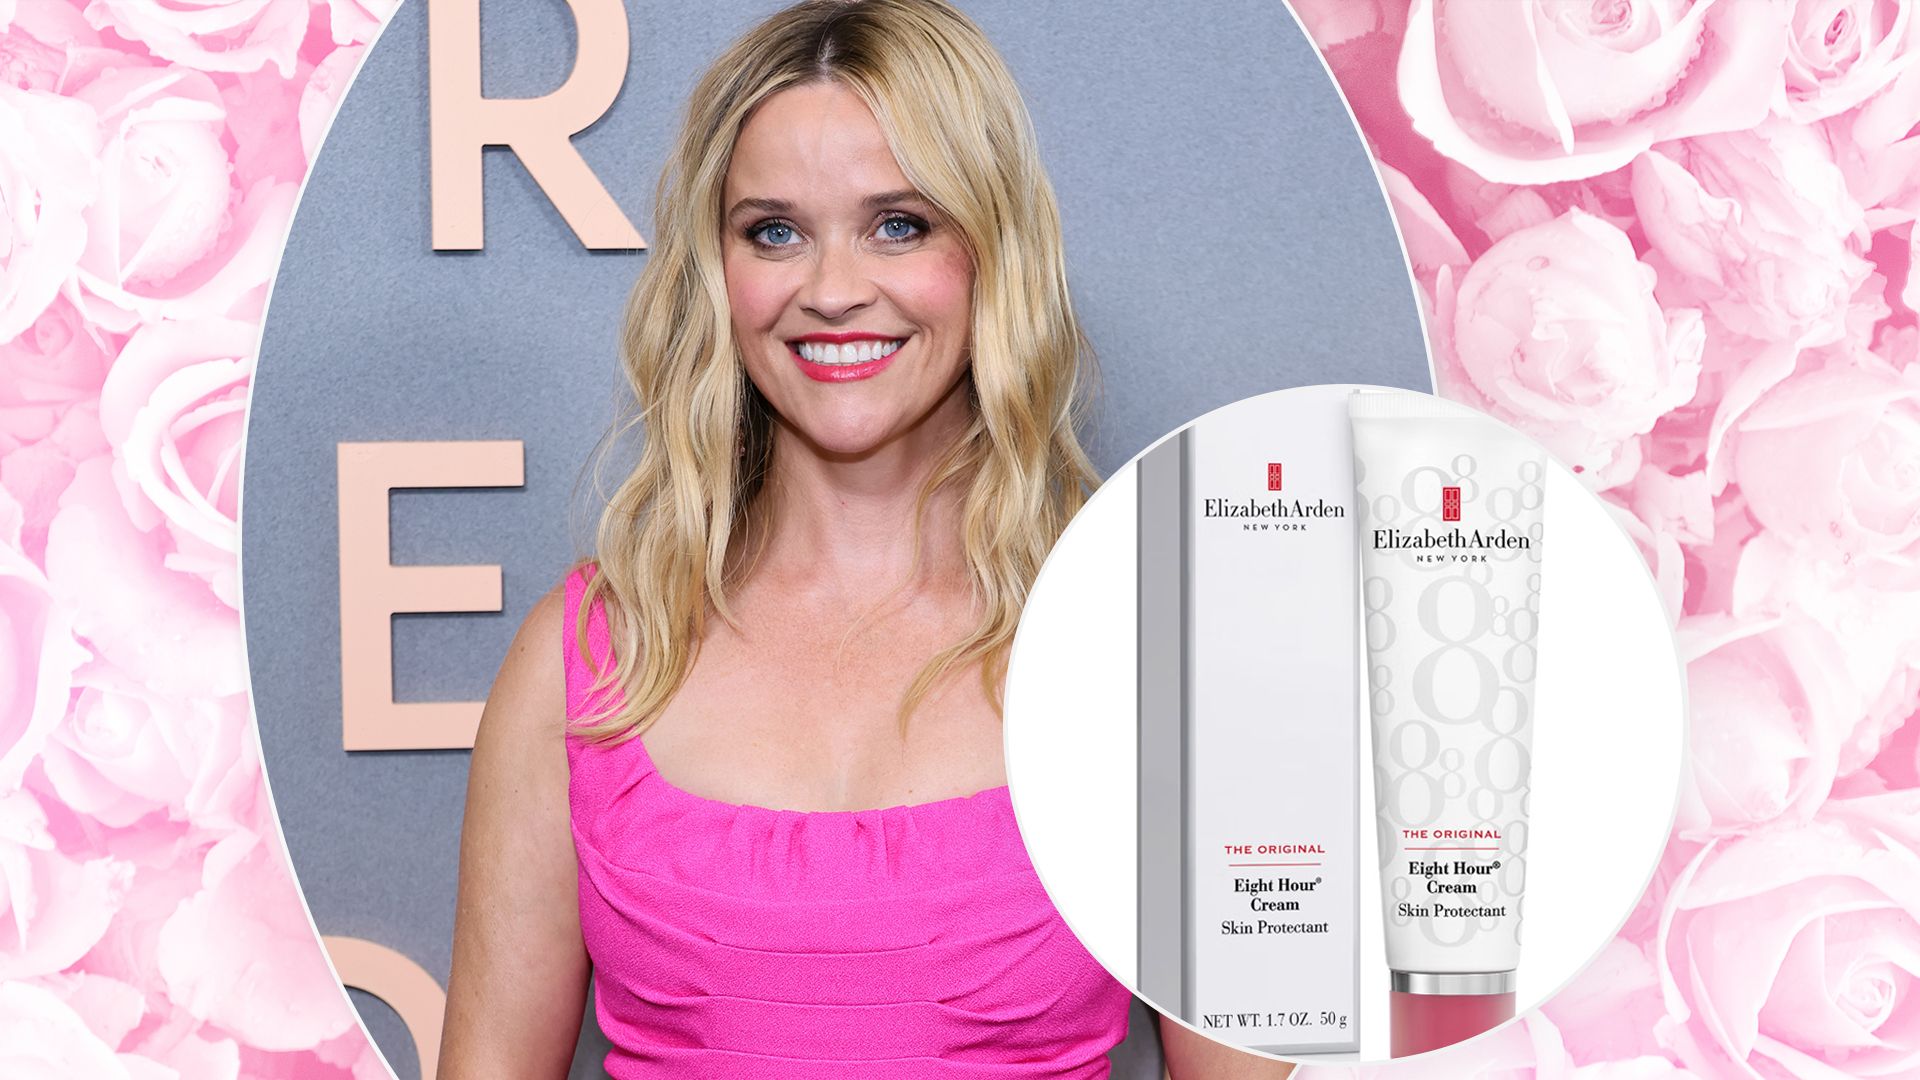 Reese Witherspoon swears by this face cream – and it's half-price in the Amazon Prime Day sale